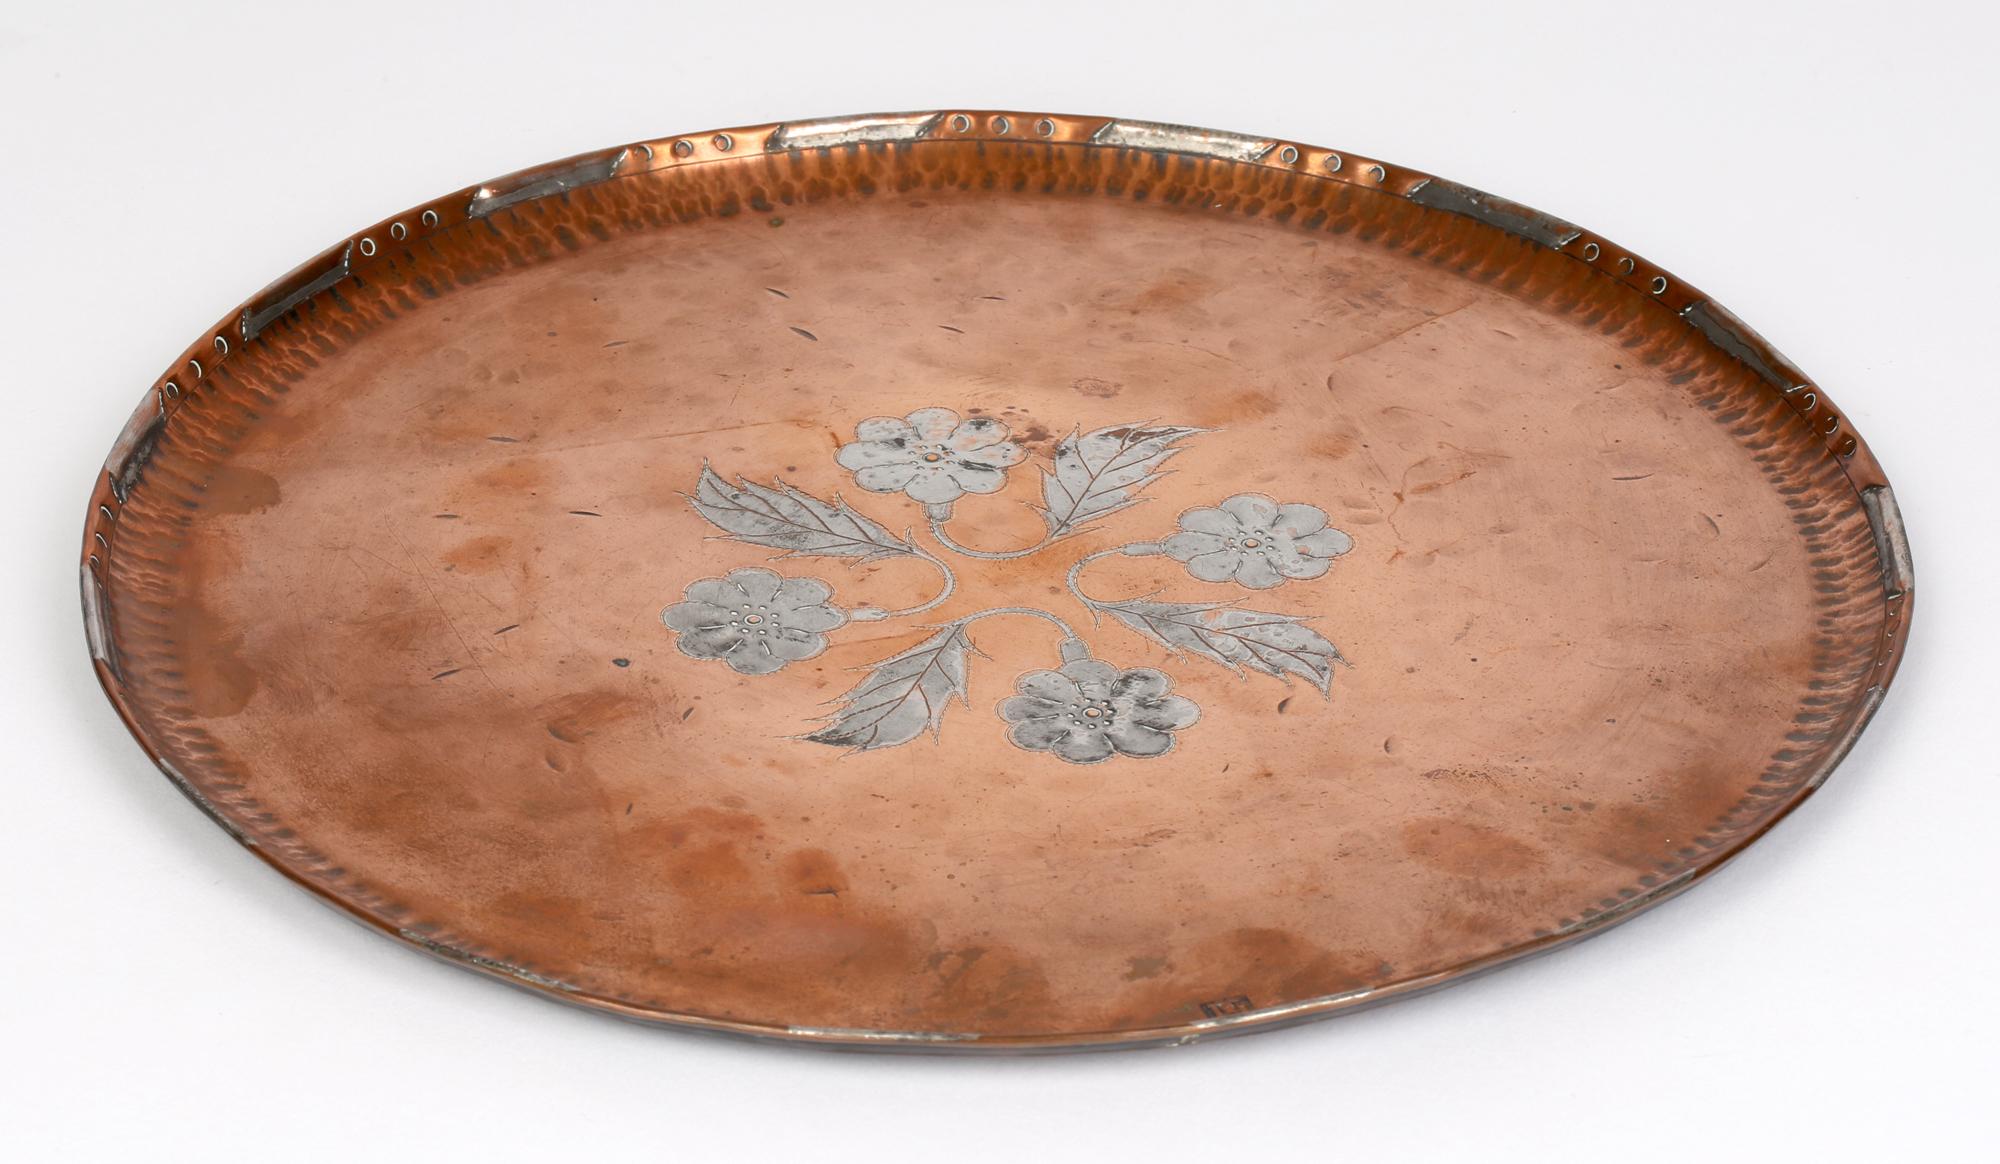 Arts & Crafts Inlaid Floral Design Copper Tray Hugh Wallis Style Signed PG 2